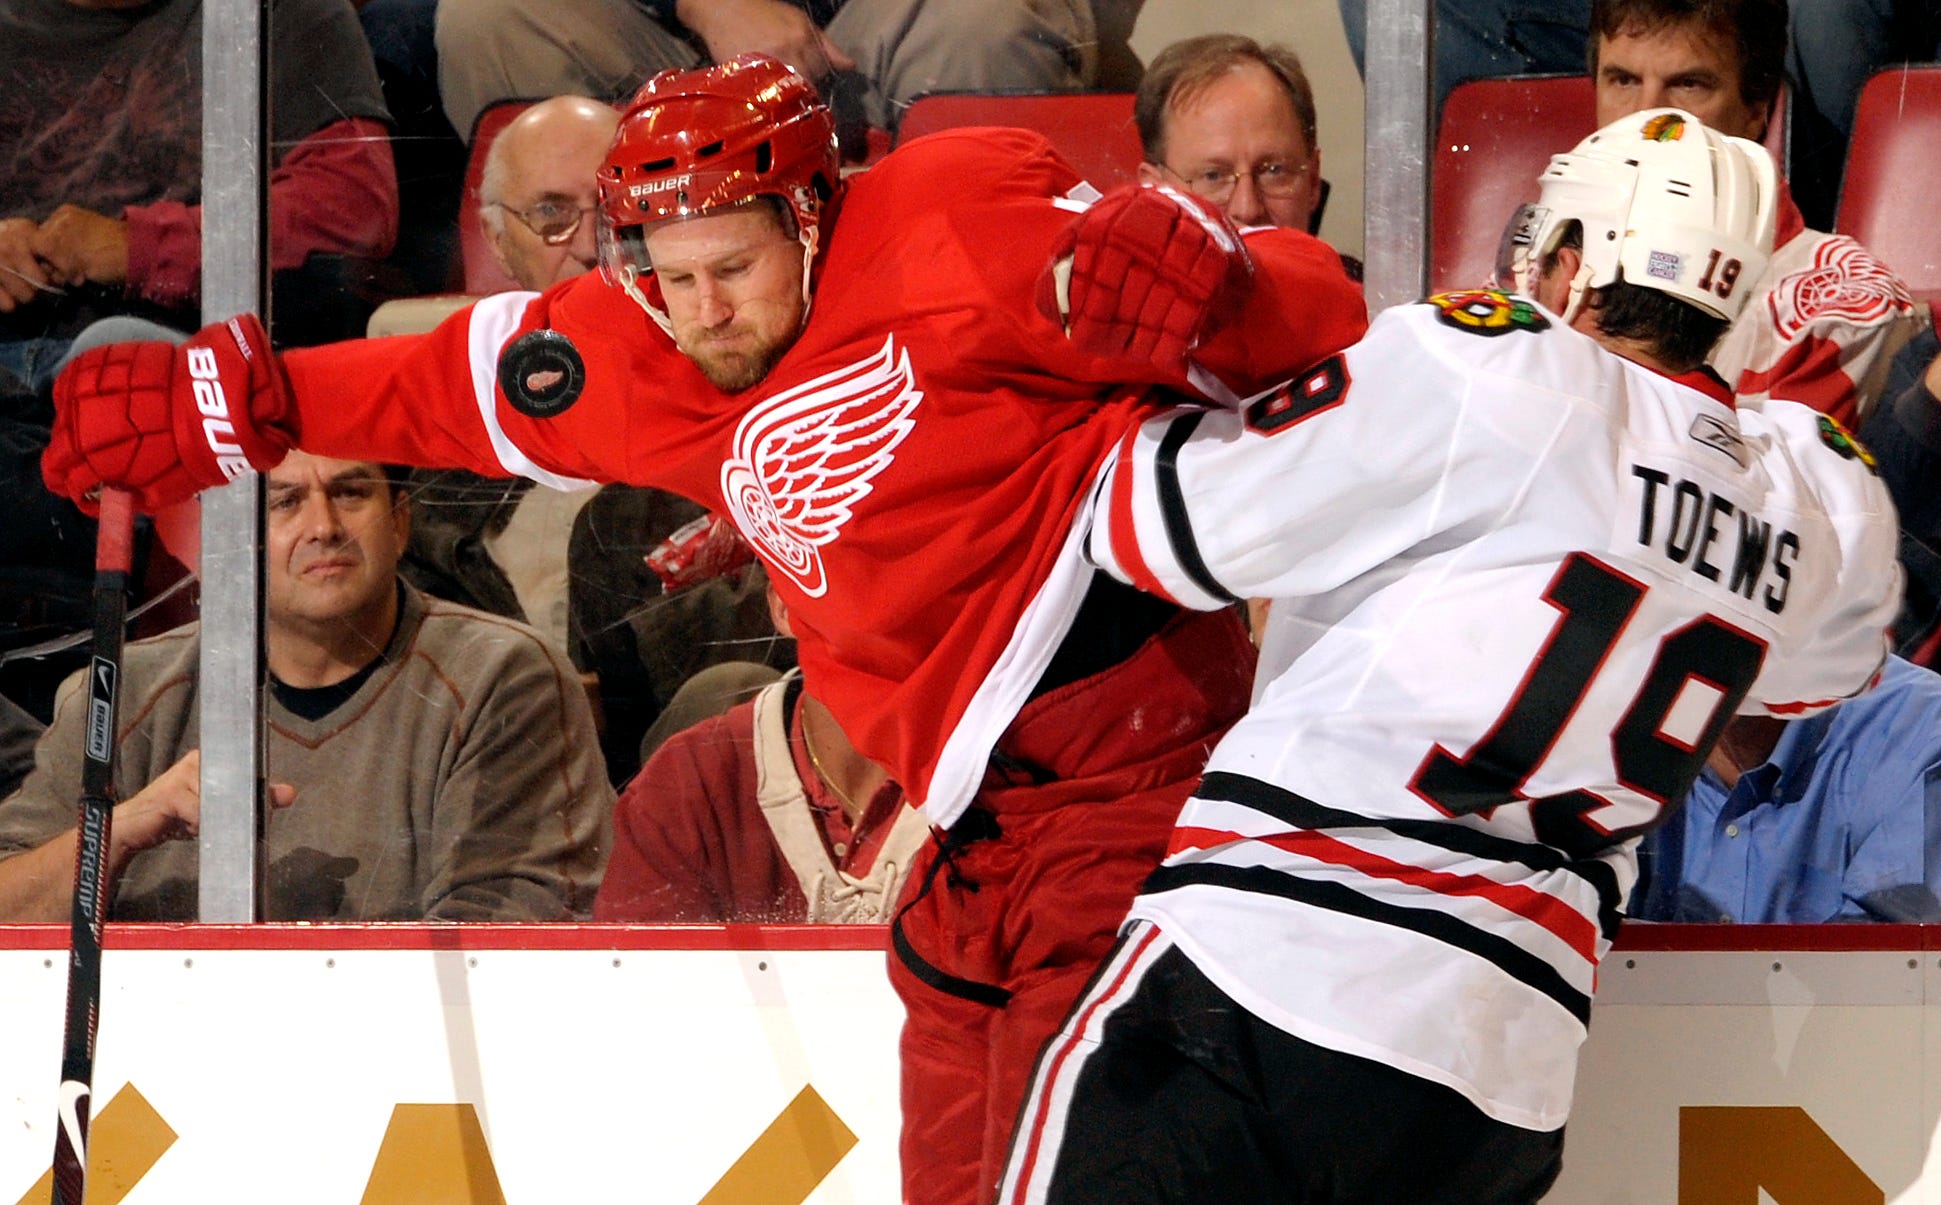 Detroit ' s Niklas Kronwall and Chicago ' s Jonathan Toews fight for the puck during the home opener at Joe Louis Arena on Oct. 8, 2009.